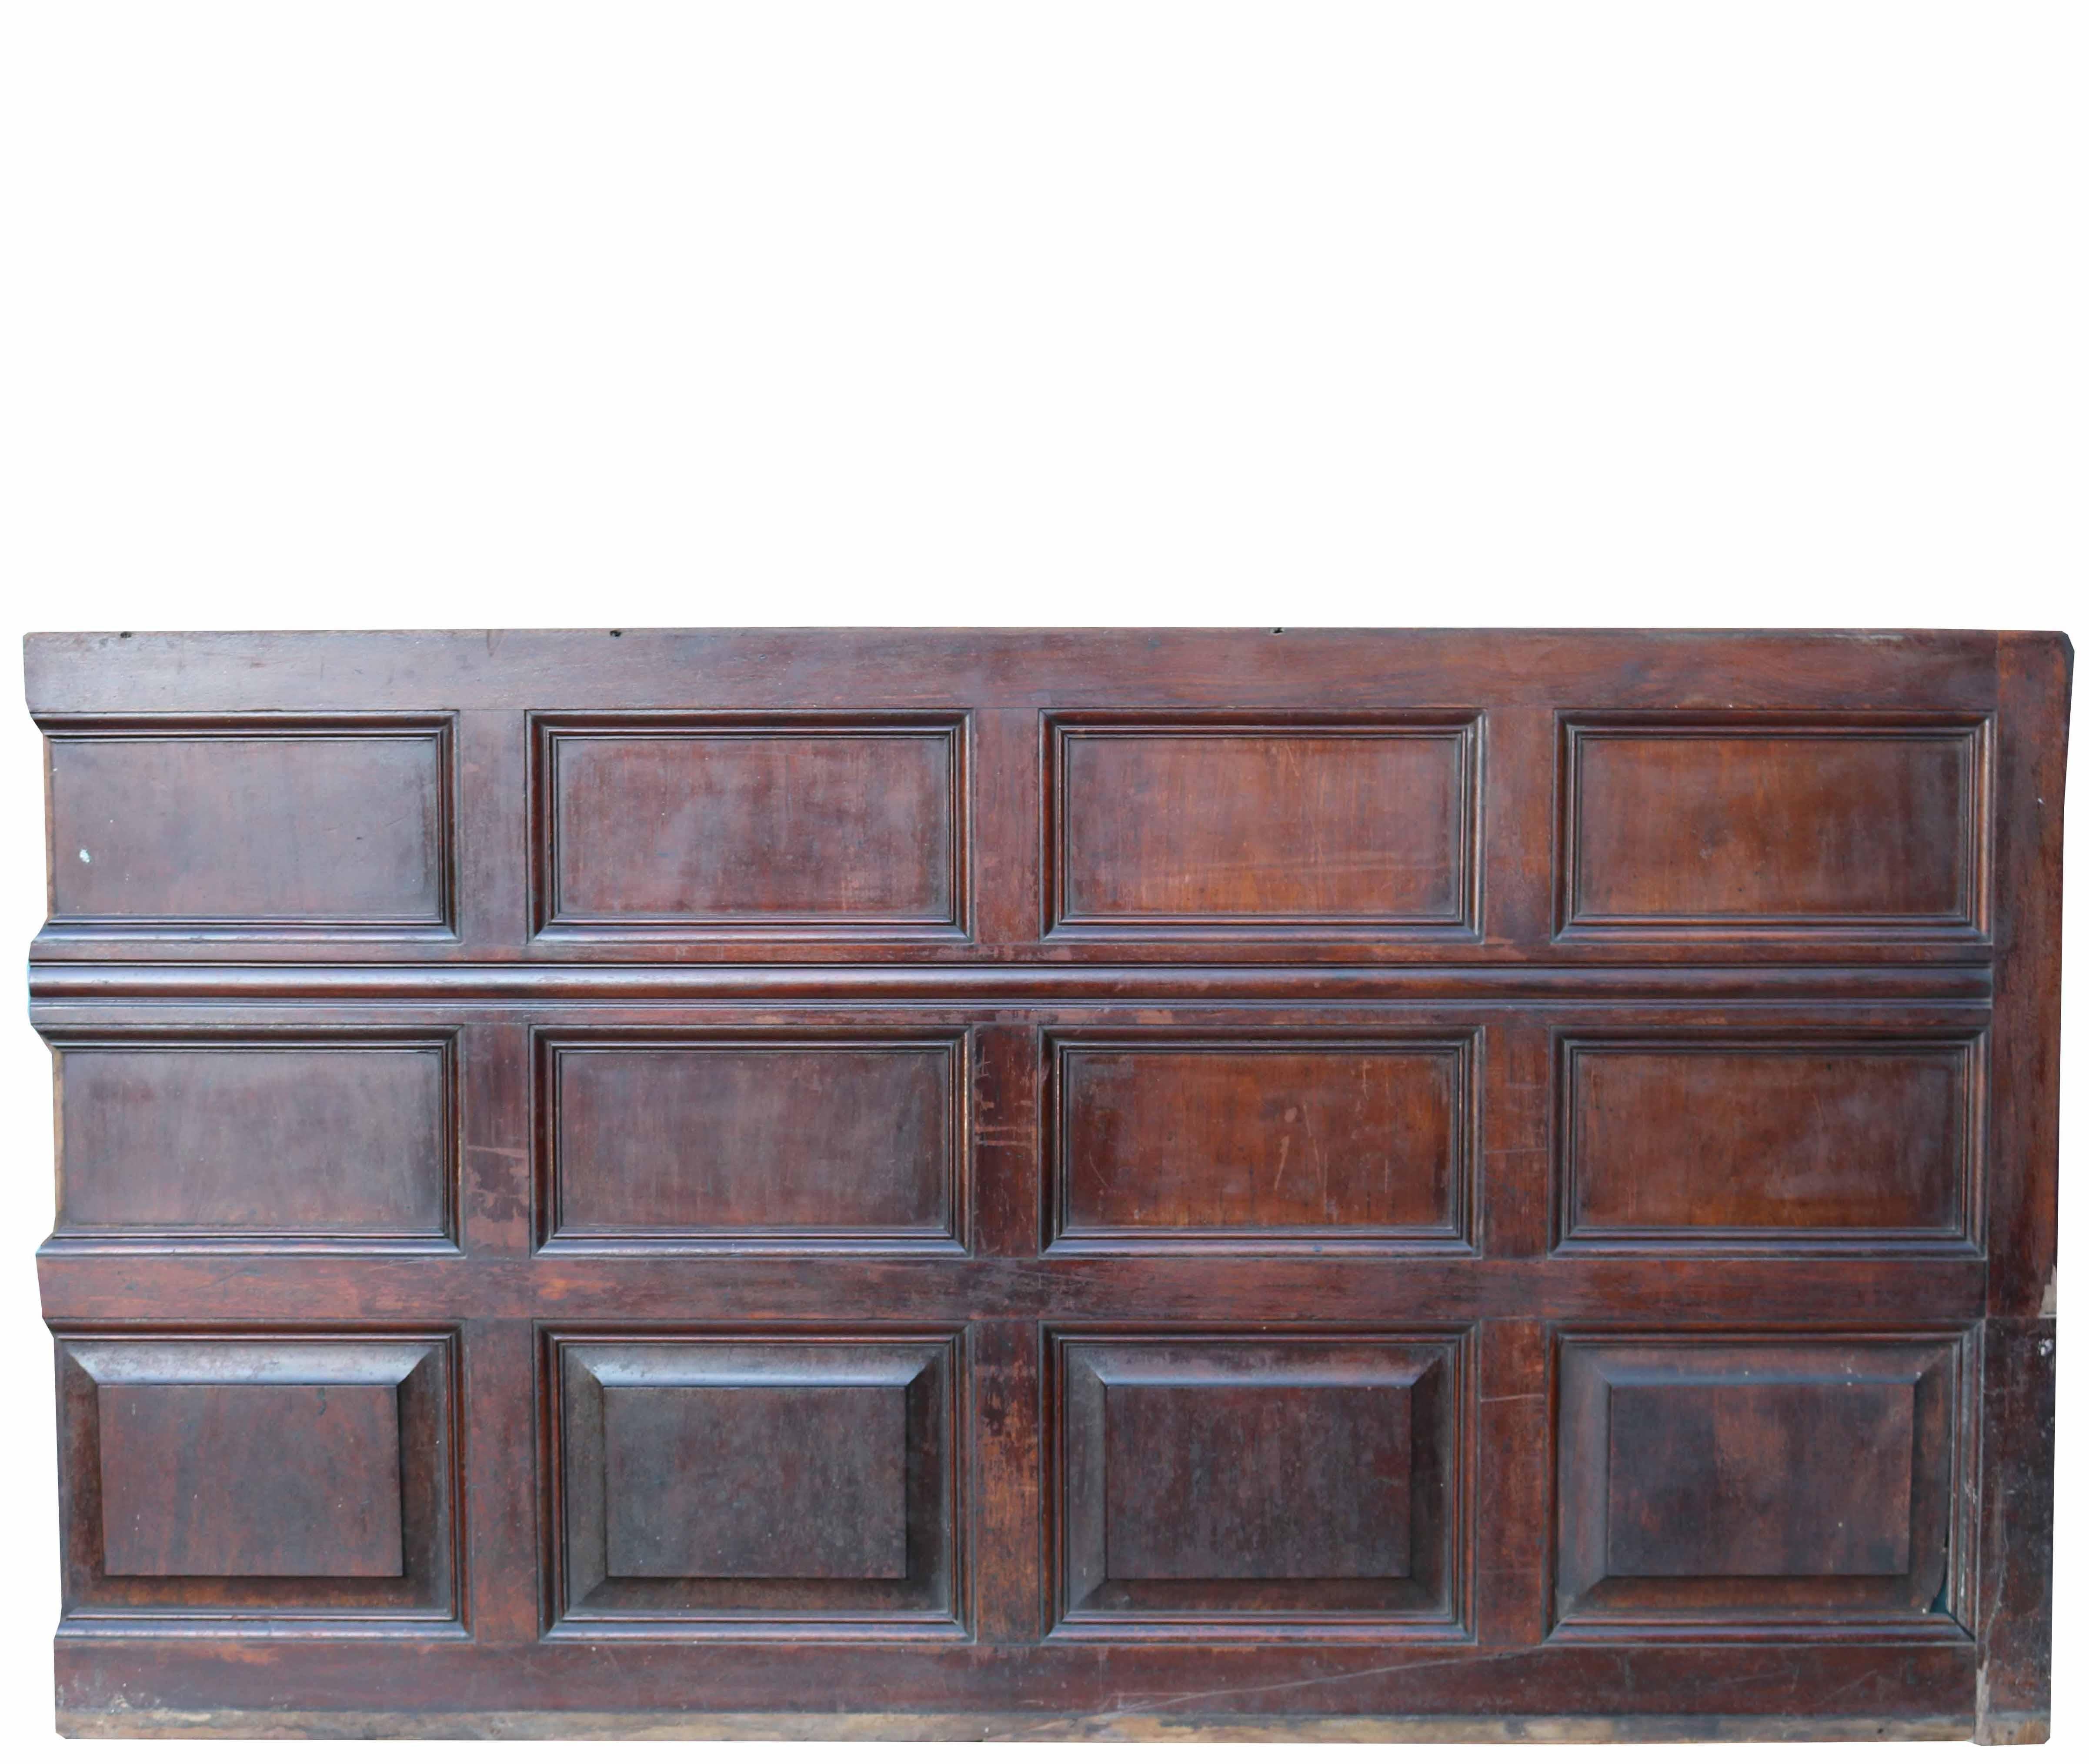 About:

A 15.7 linear meters run of antique mahogany wall panelling. There are 9 main panelling pieces with additional skirting and moulding for the top edge. Reclaimed from a property in Birmingham.

Condition report:

Mostly in very good